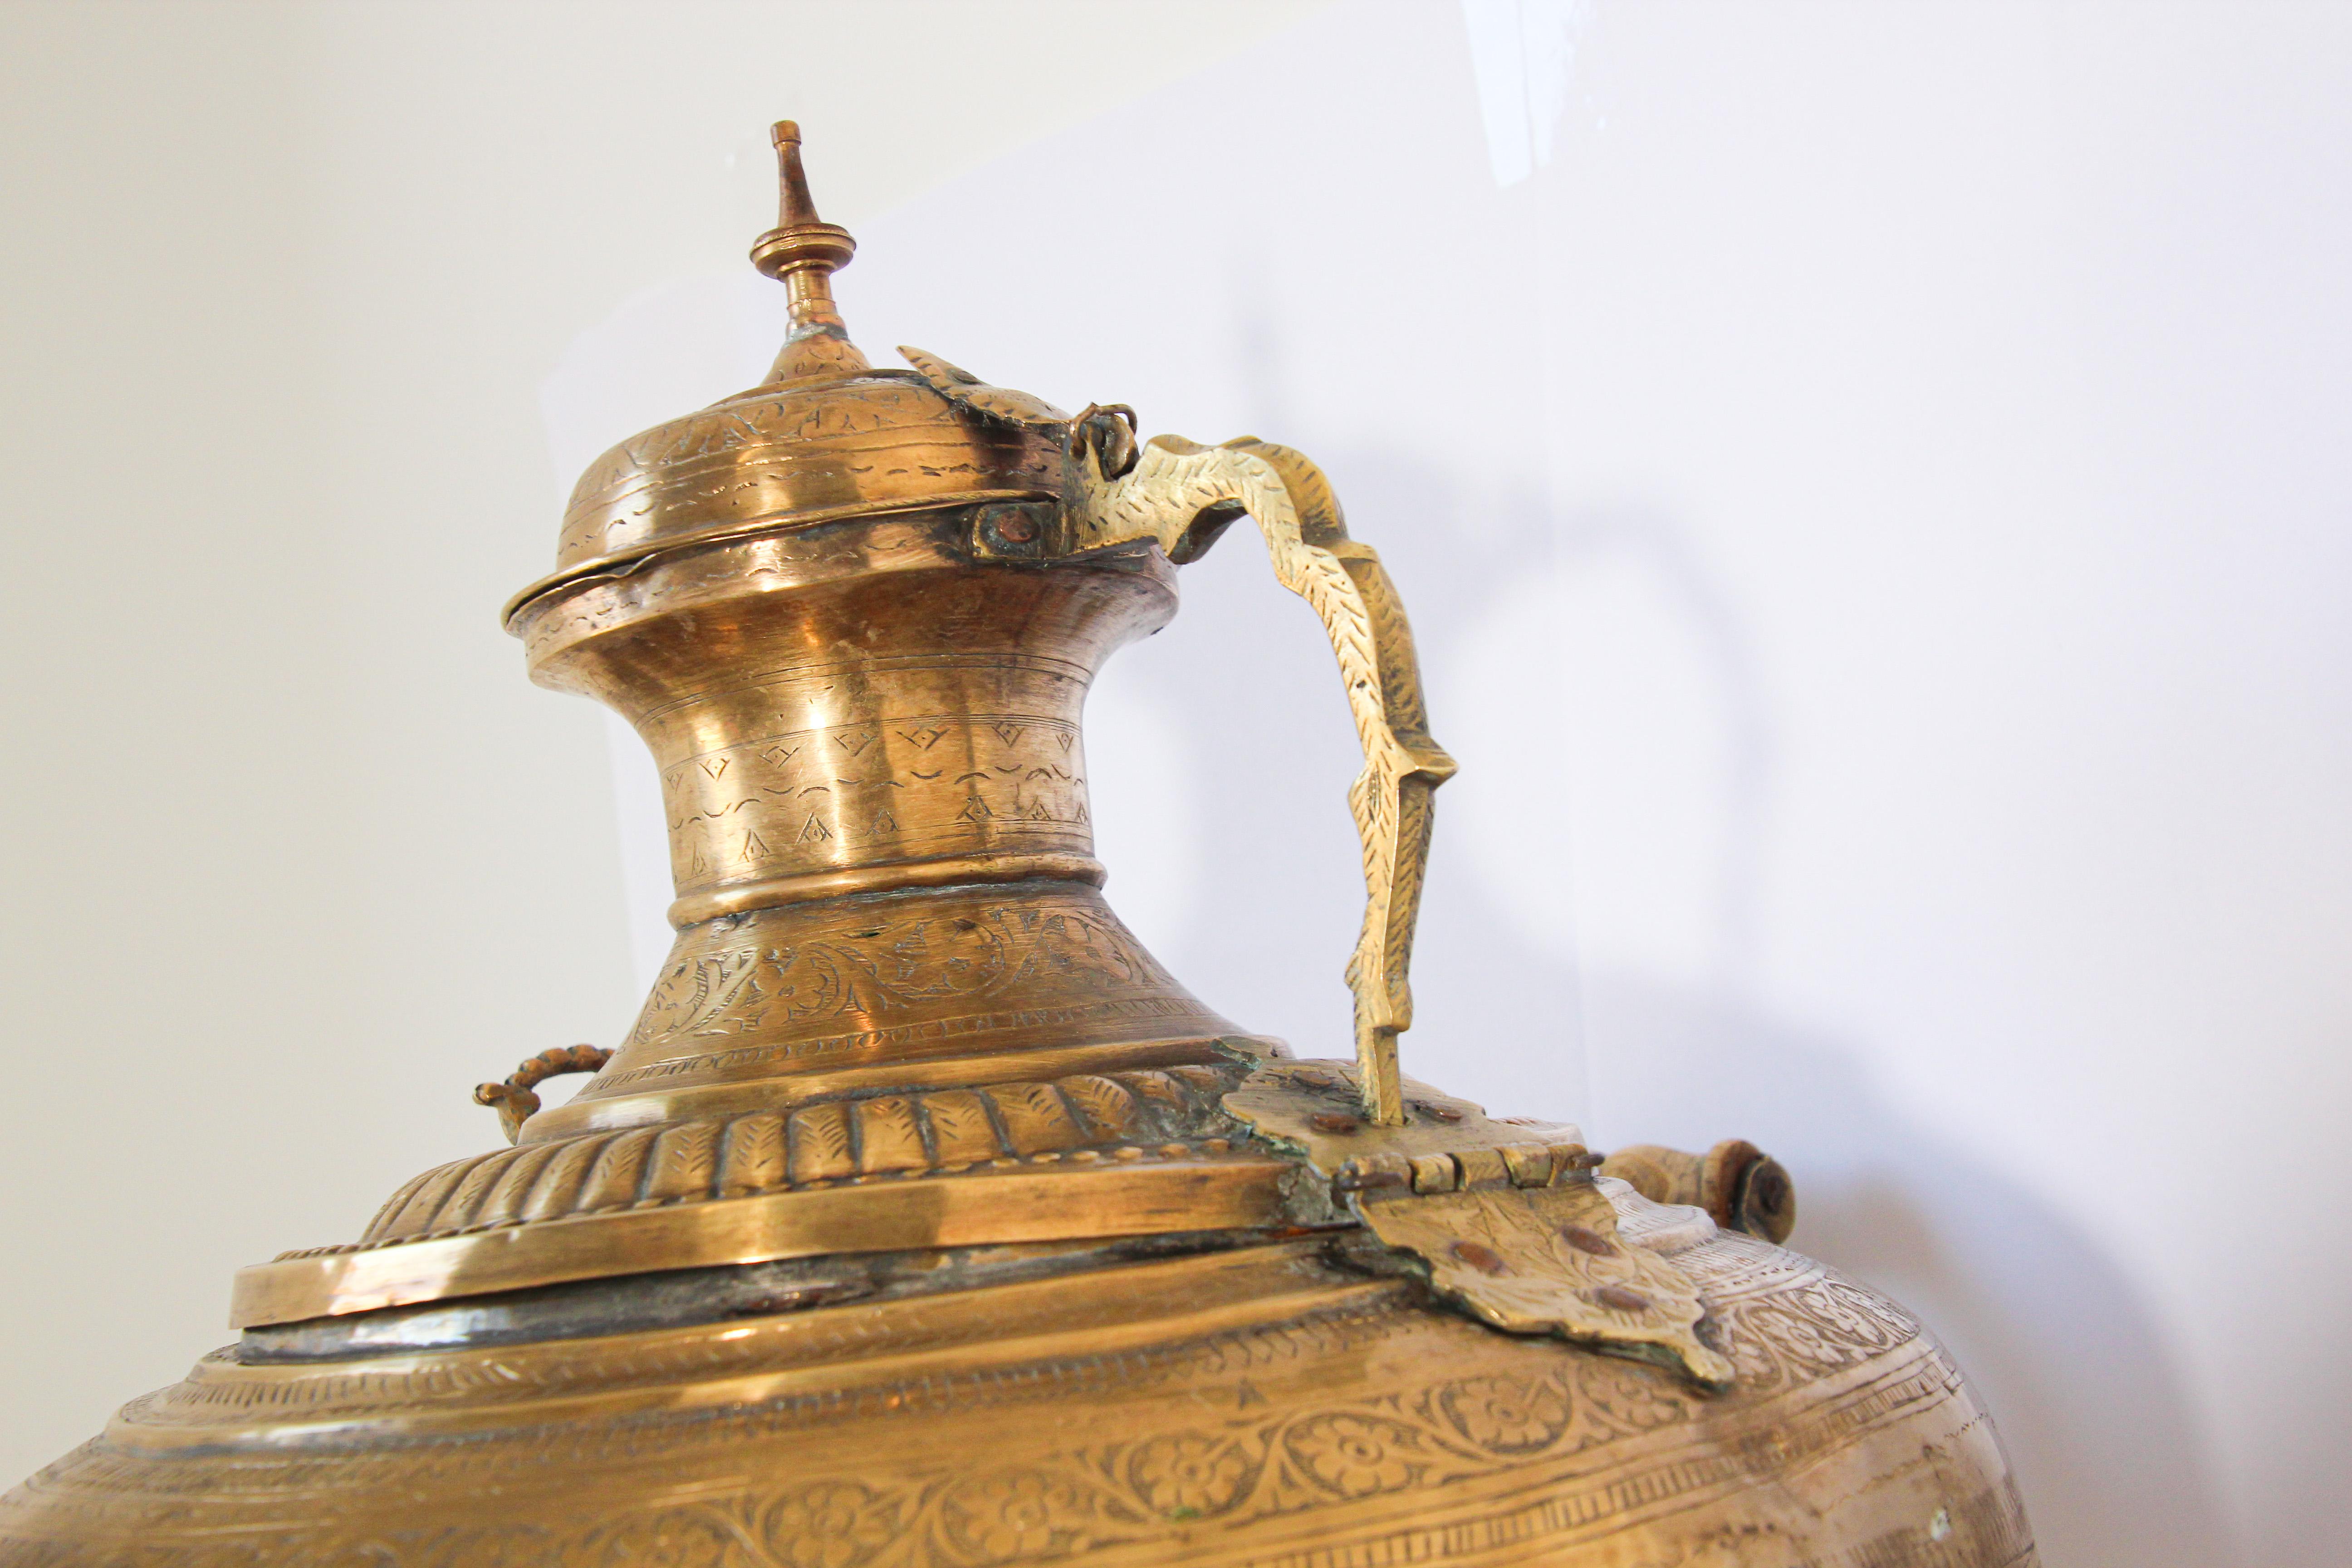 what is a samovar used for